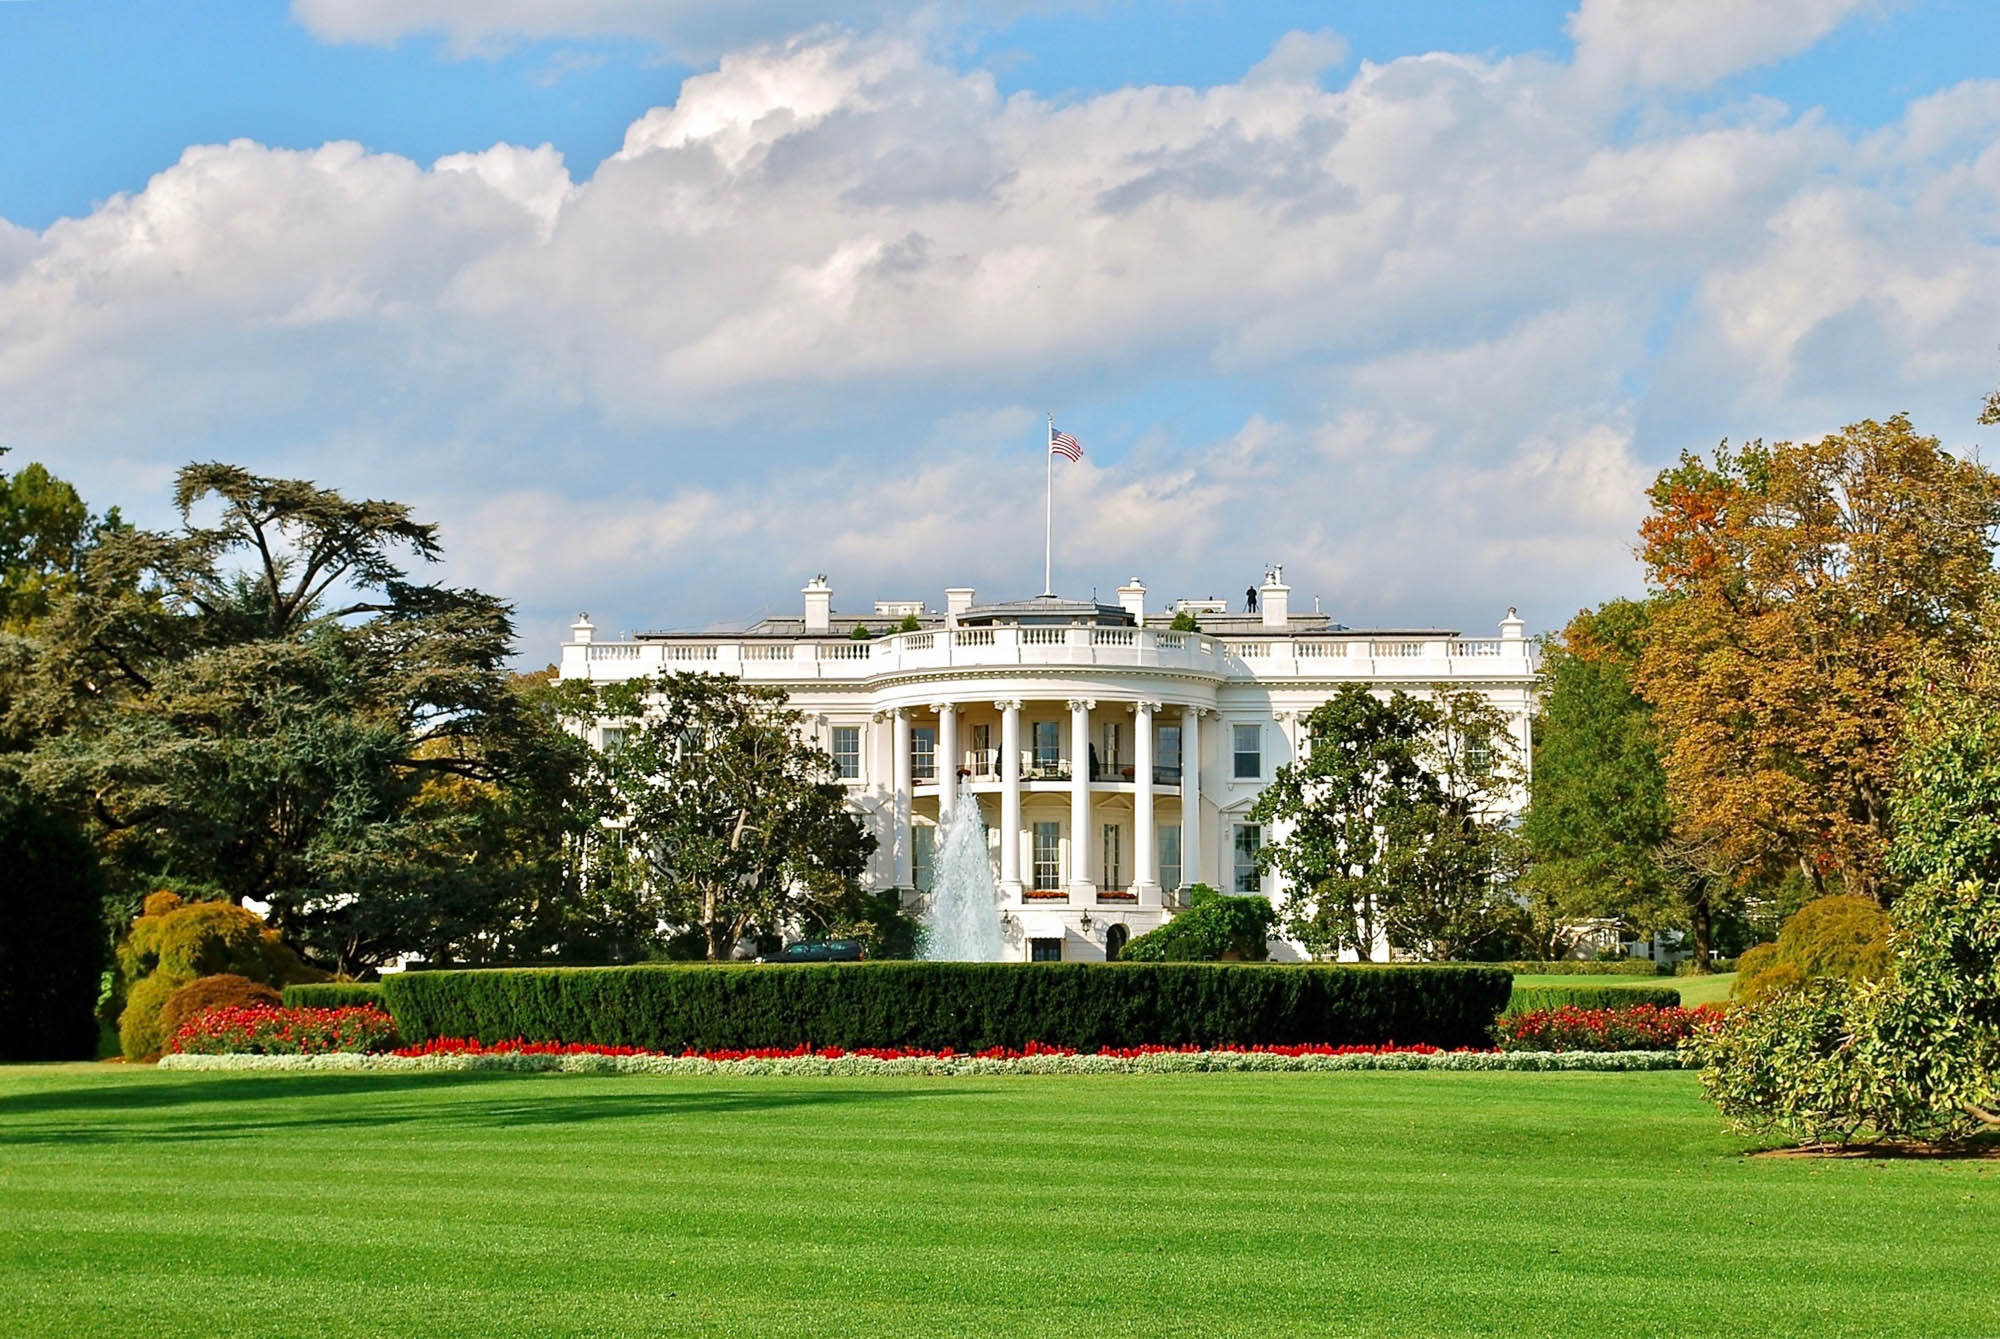 The White House of the United States of America in Washington, DC. 